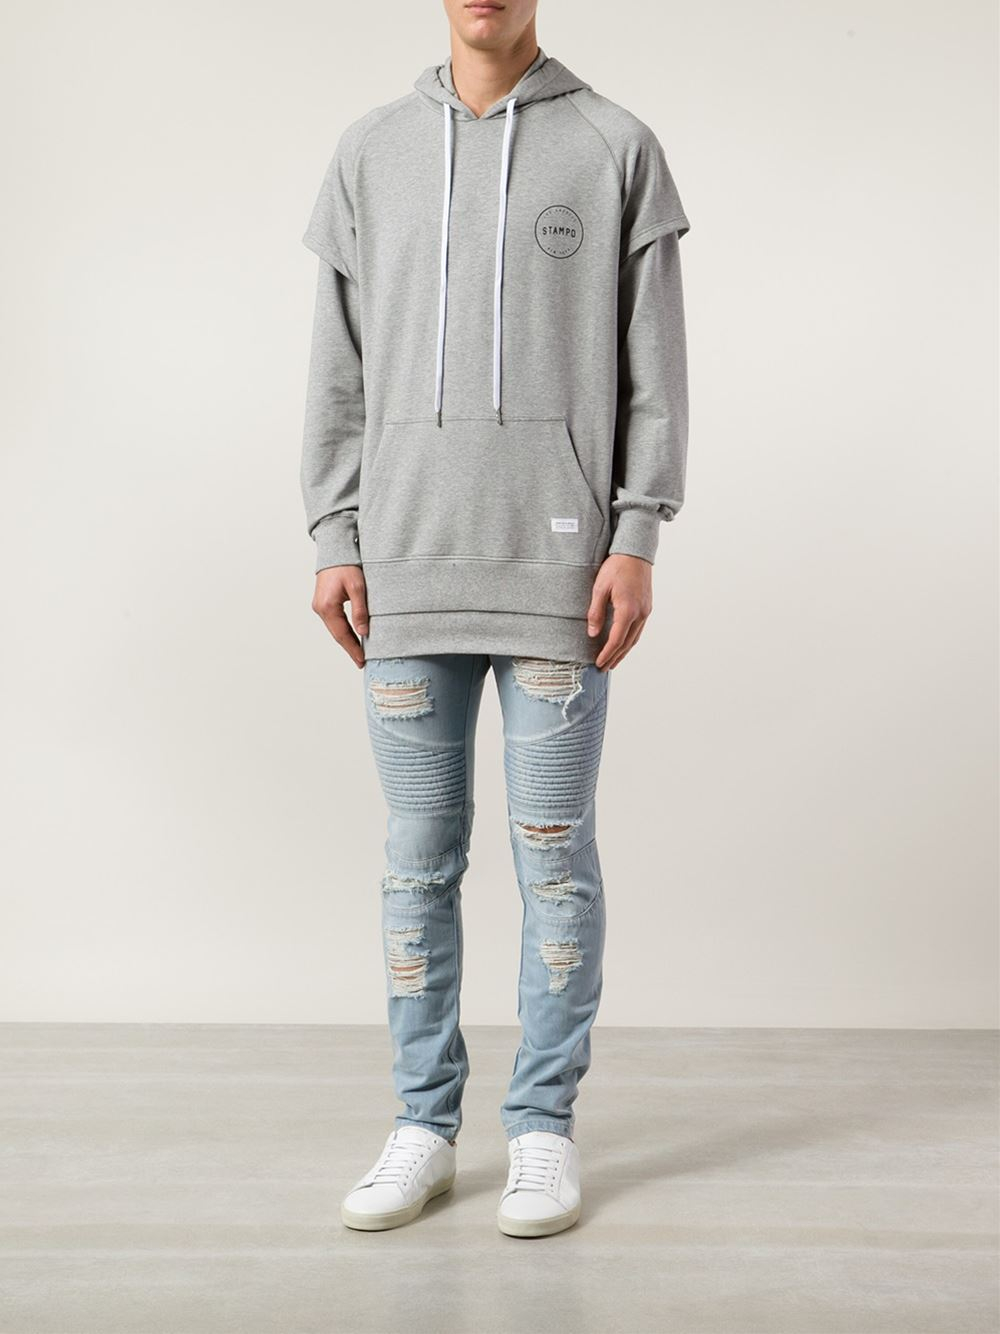 Lyst - Stampd Oversized Hoodie in Gray for Men